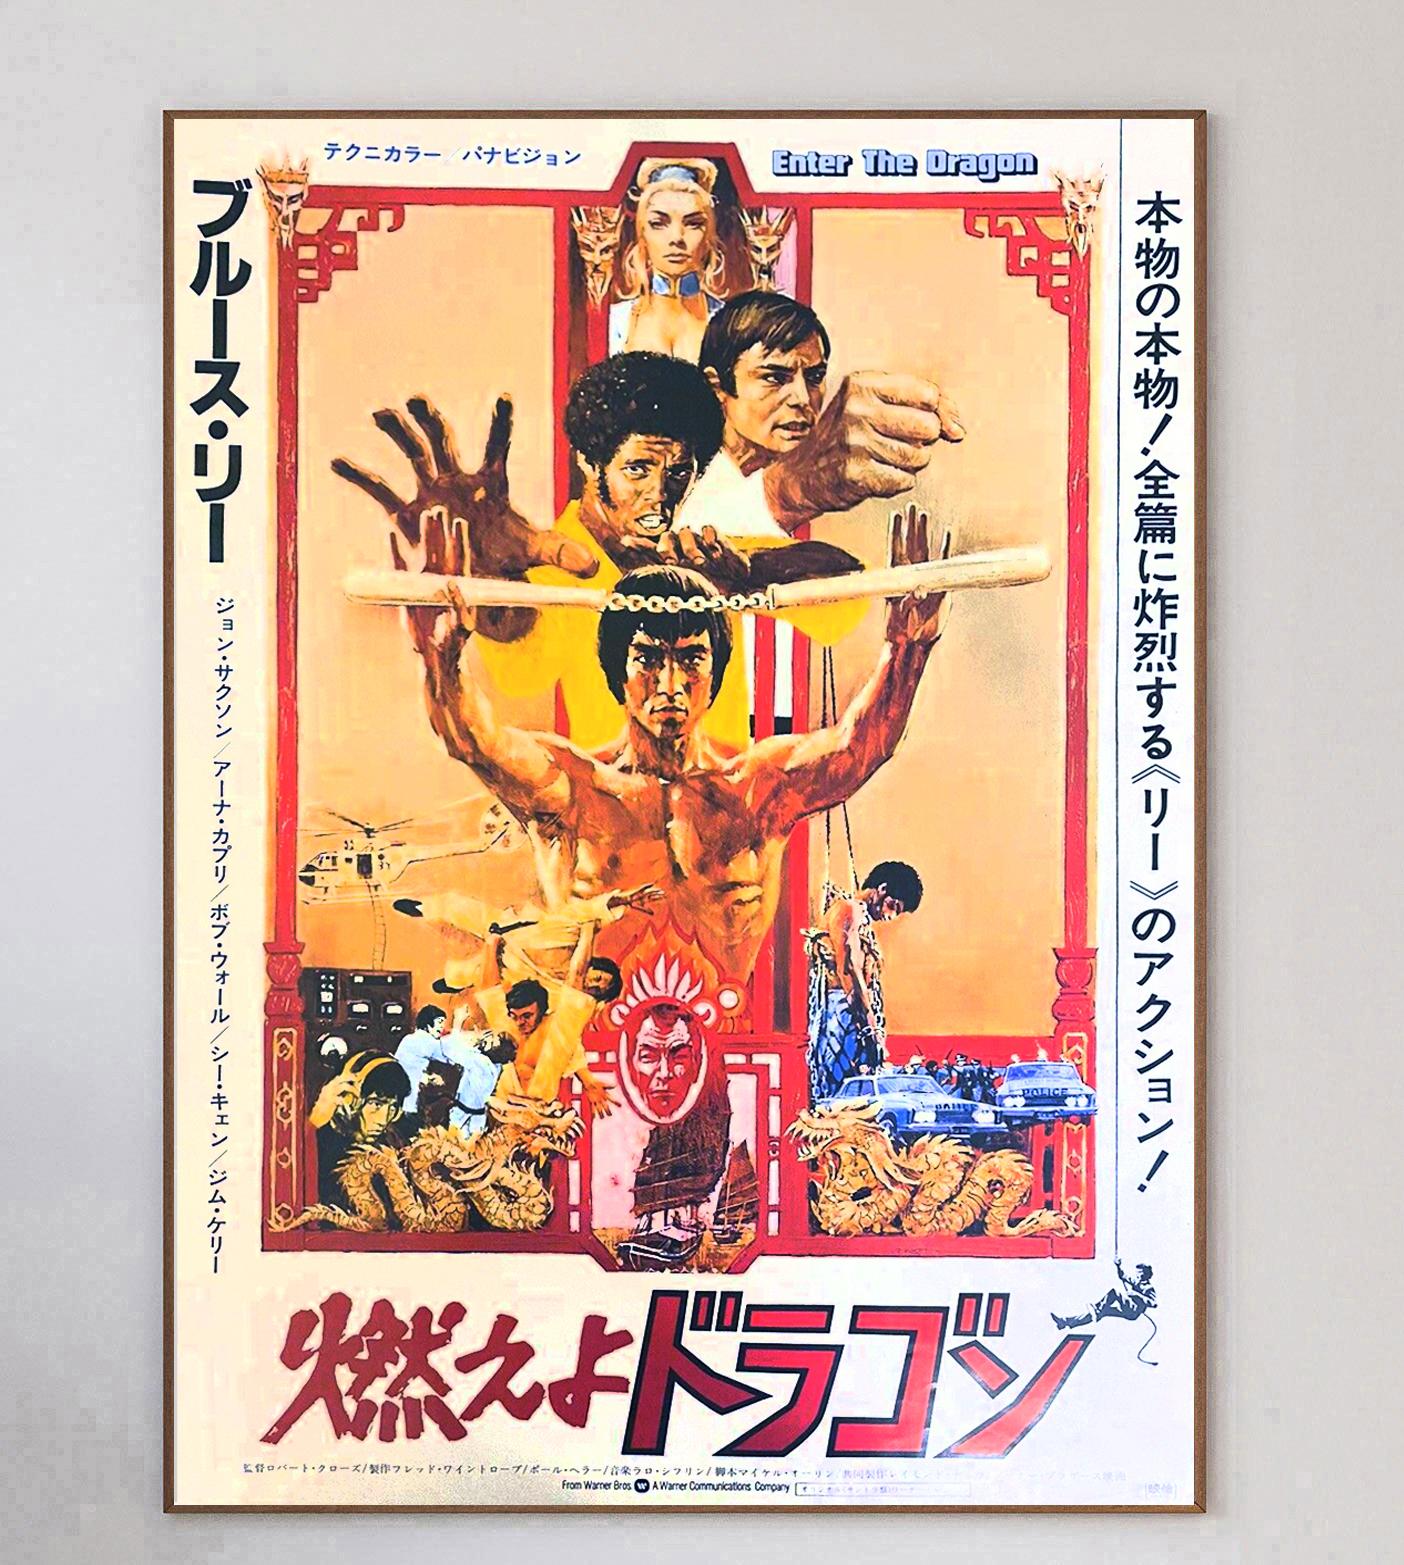 Widely considered one of, if not the greatest martial arts films of all time. Enter the Dragon is a 1973 martial arts film produced by and starring Bruce Lee. The film, which co-stars John Saxon and Jim Kelly, was directed by Robert Clouse. It would